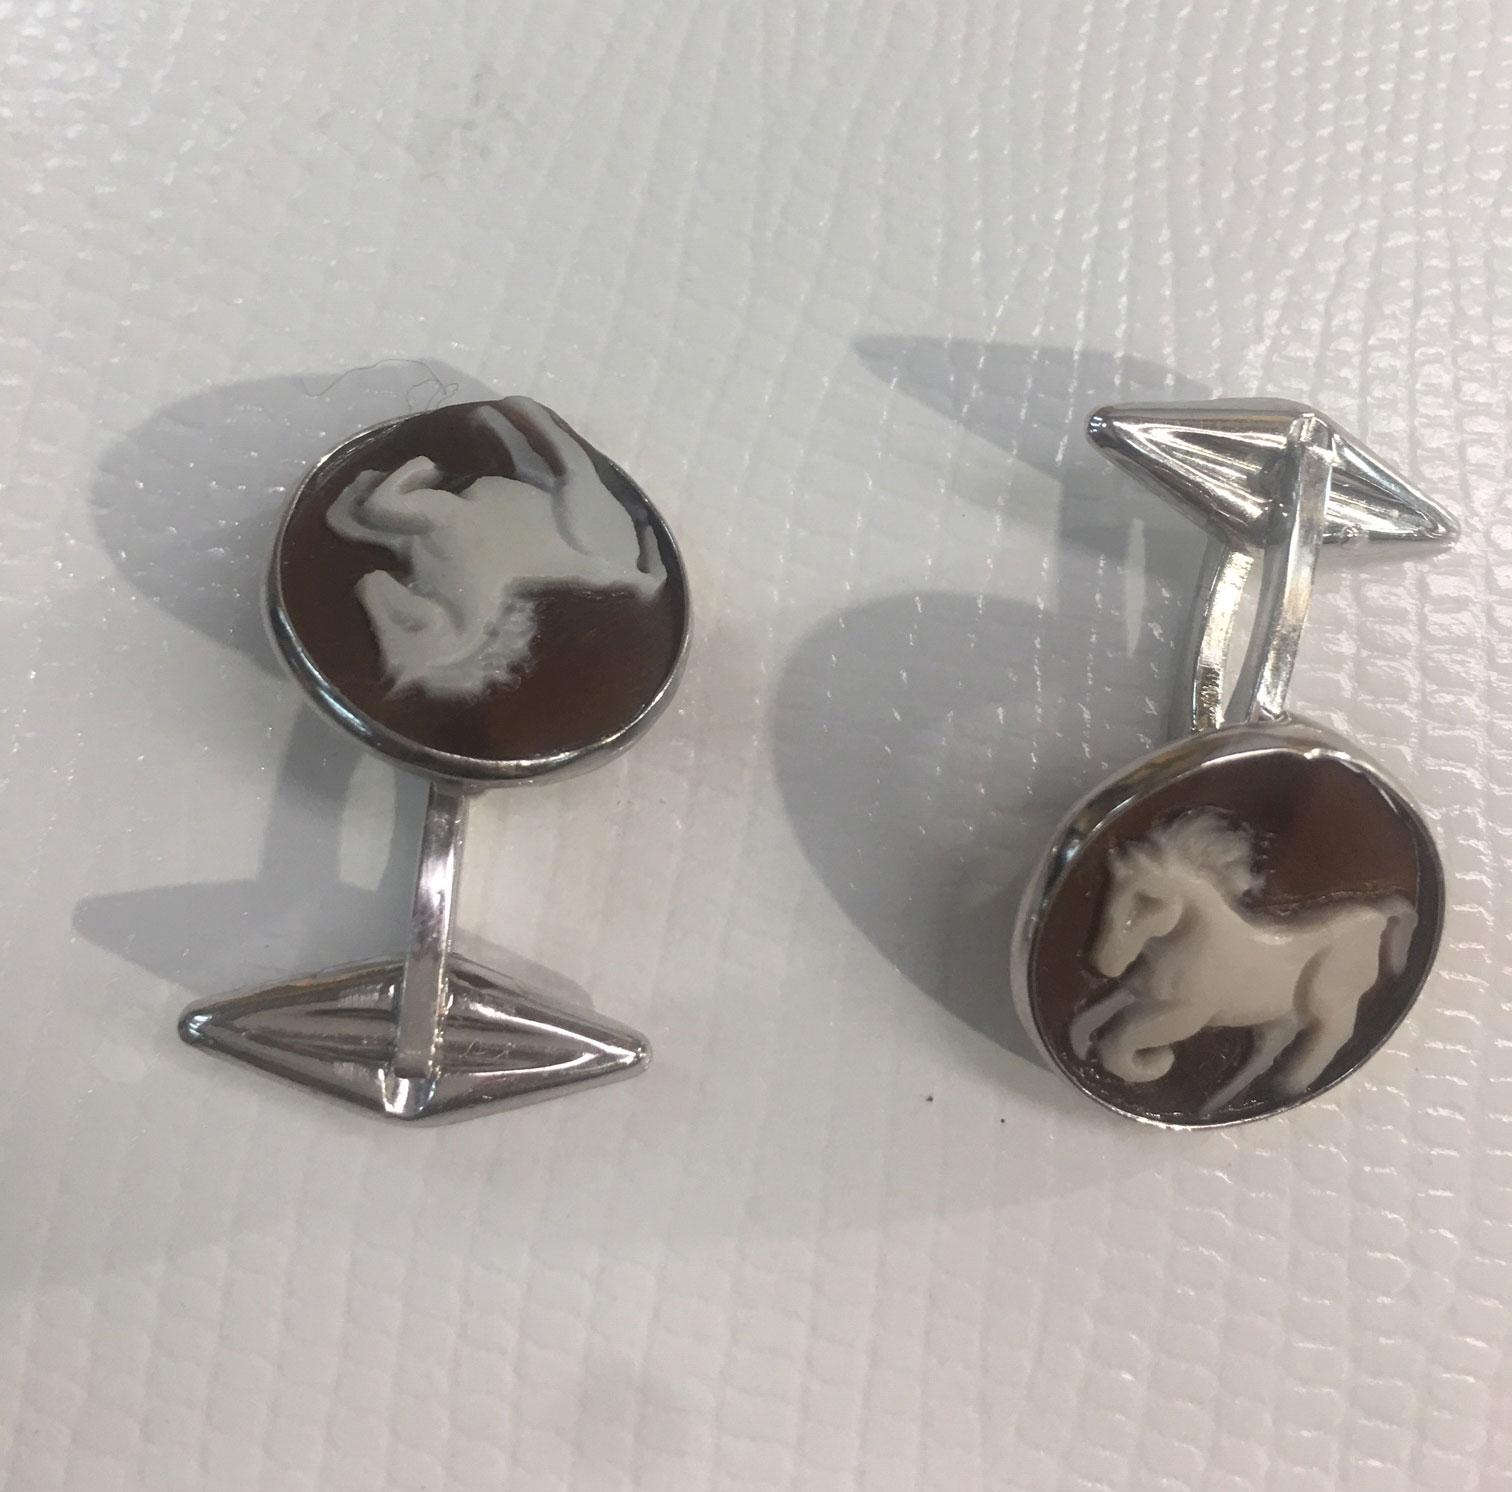 Exquisite Equestrian Galloping Horse Hand carved shell Cameo Cufflinks set in Sterling Silver; Beautiful Hand crafted design…made in Italy. The cufflinks measure approx. 16.5mm in diameter. Classic and Timeless…Quality jewelry that so fits today’s